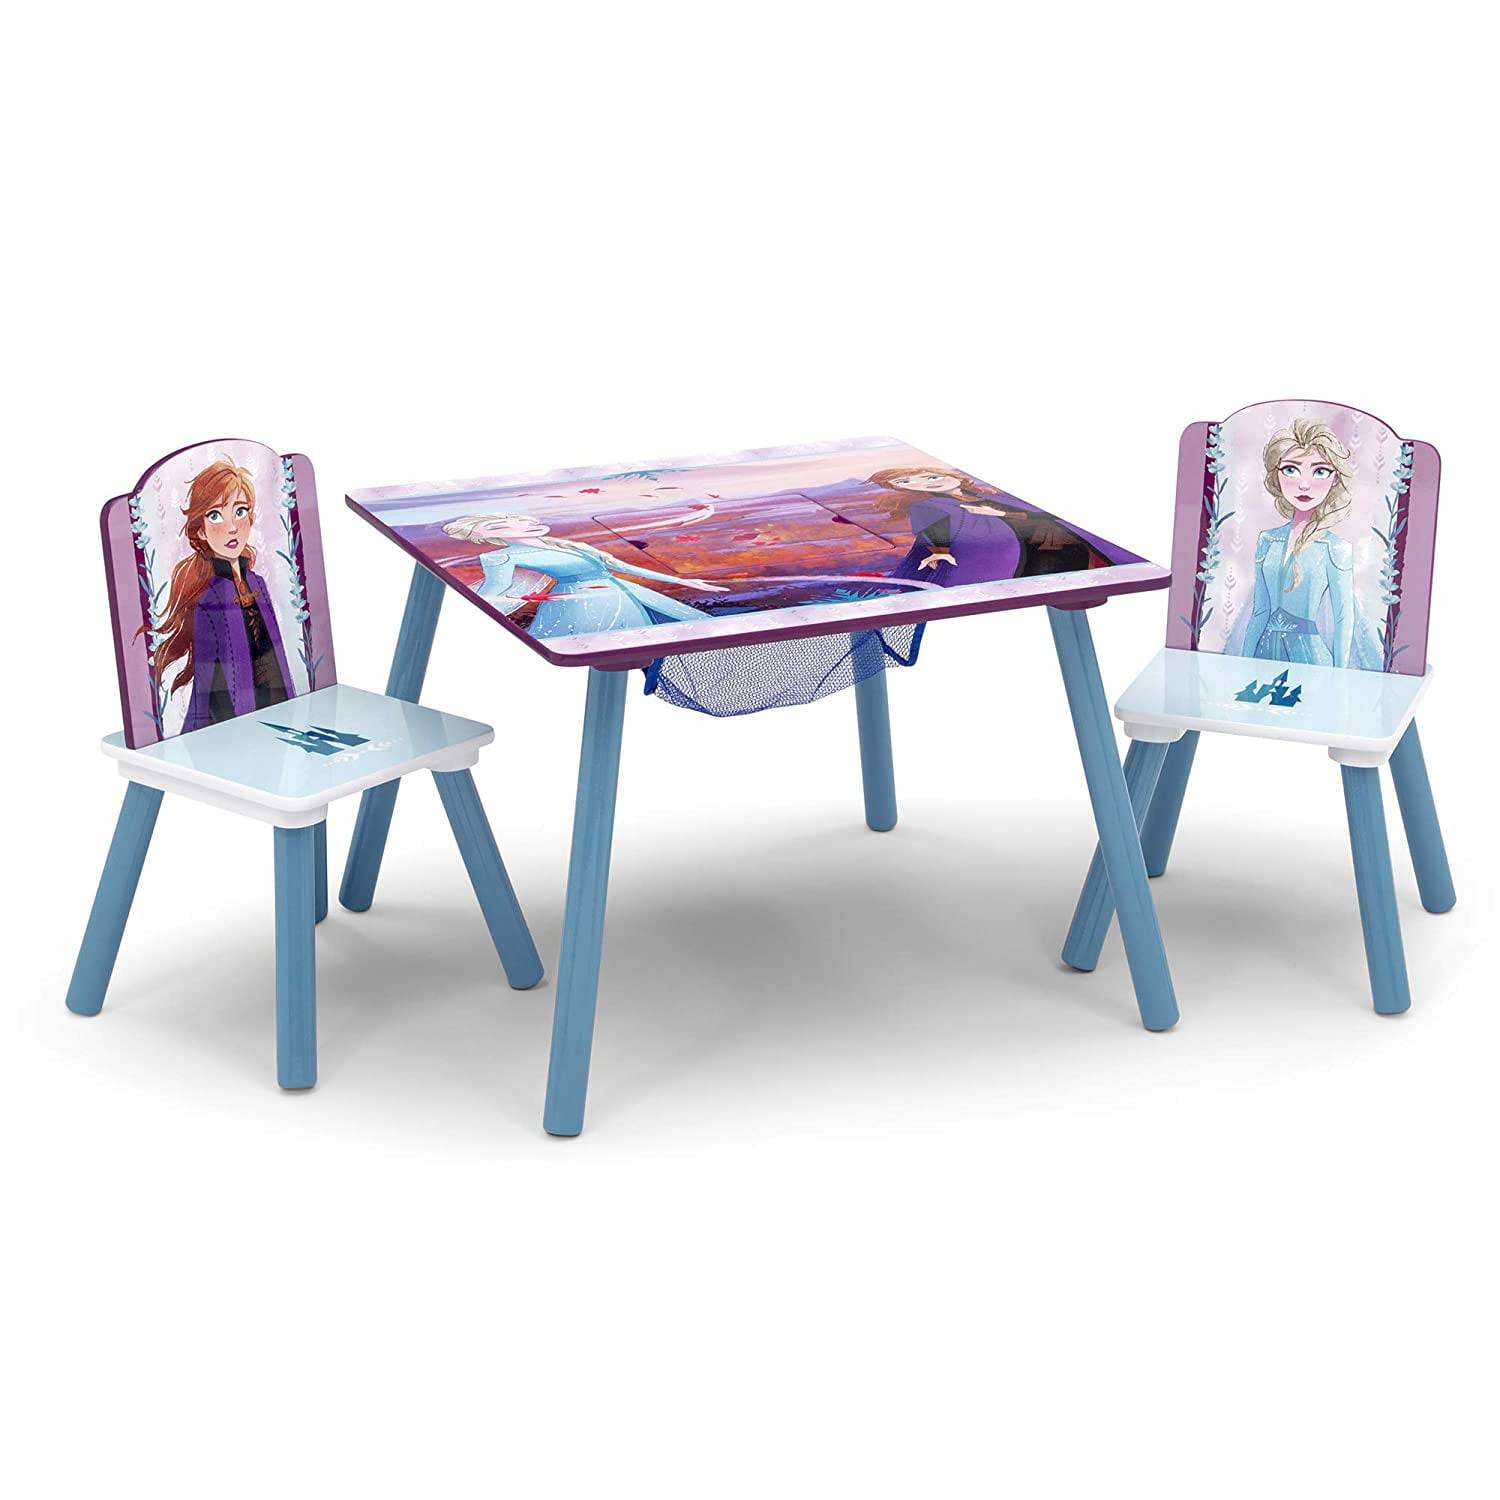 2 Chairs Included Delta Children Kids Chair Set and Table Disney Frozen 